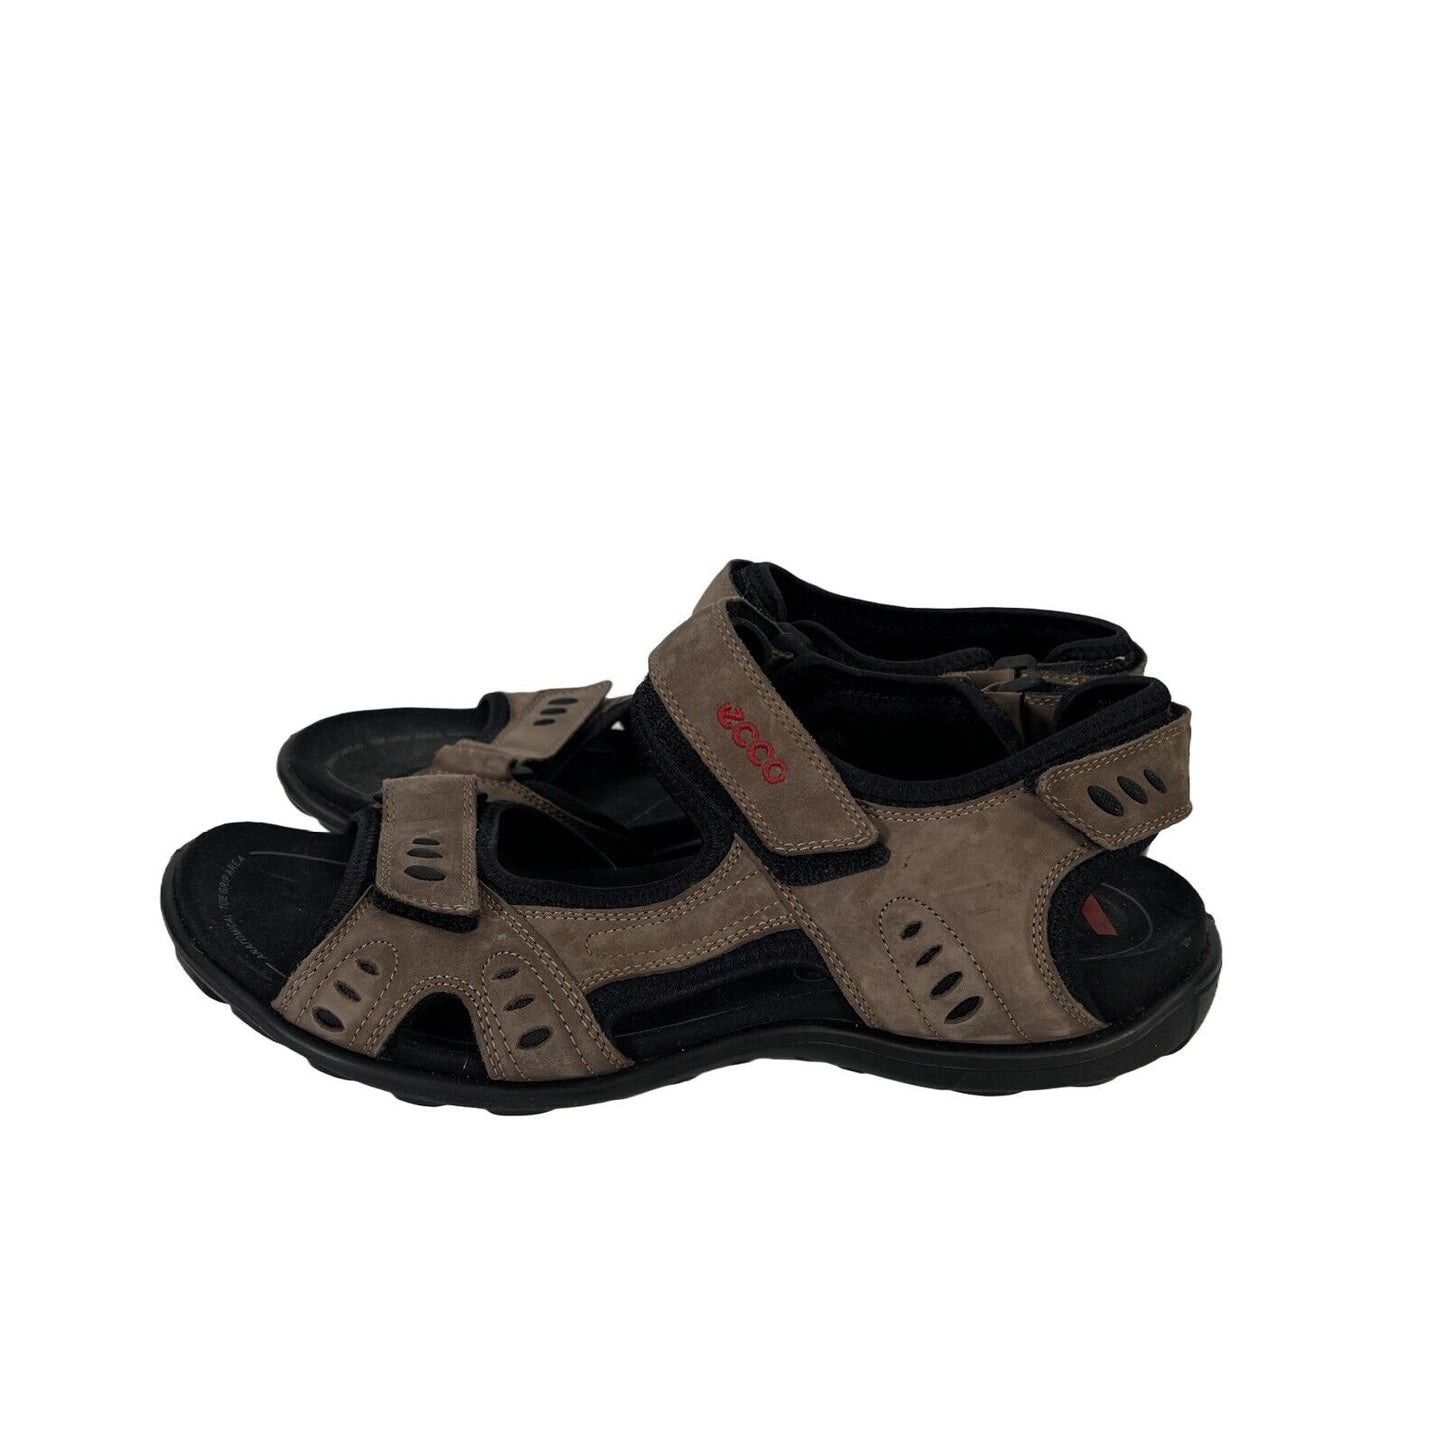 Ecco Men's Brown Leather Open Toe Hiking Sandals - 43/ US 9